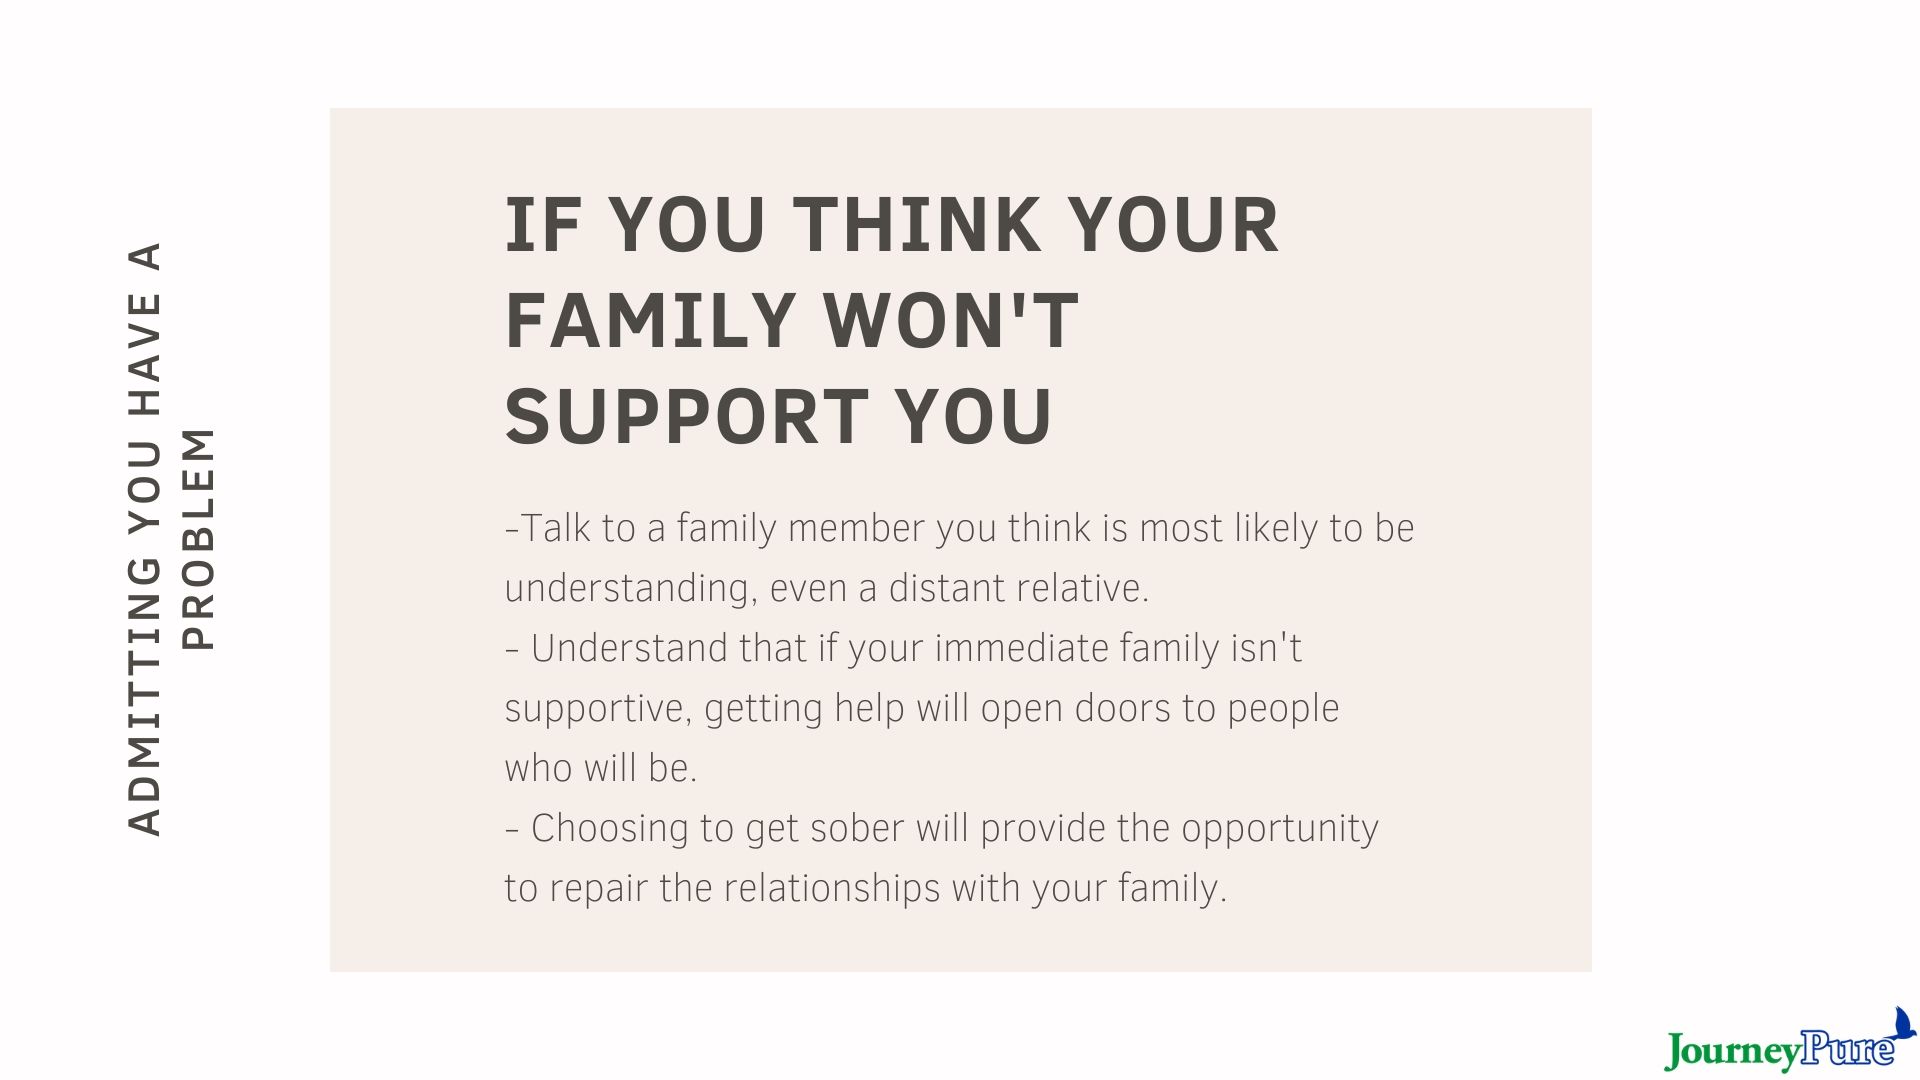 what to do if your family won't support you